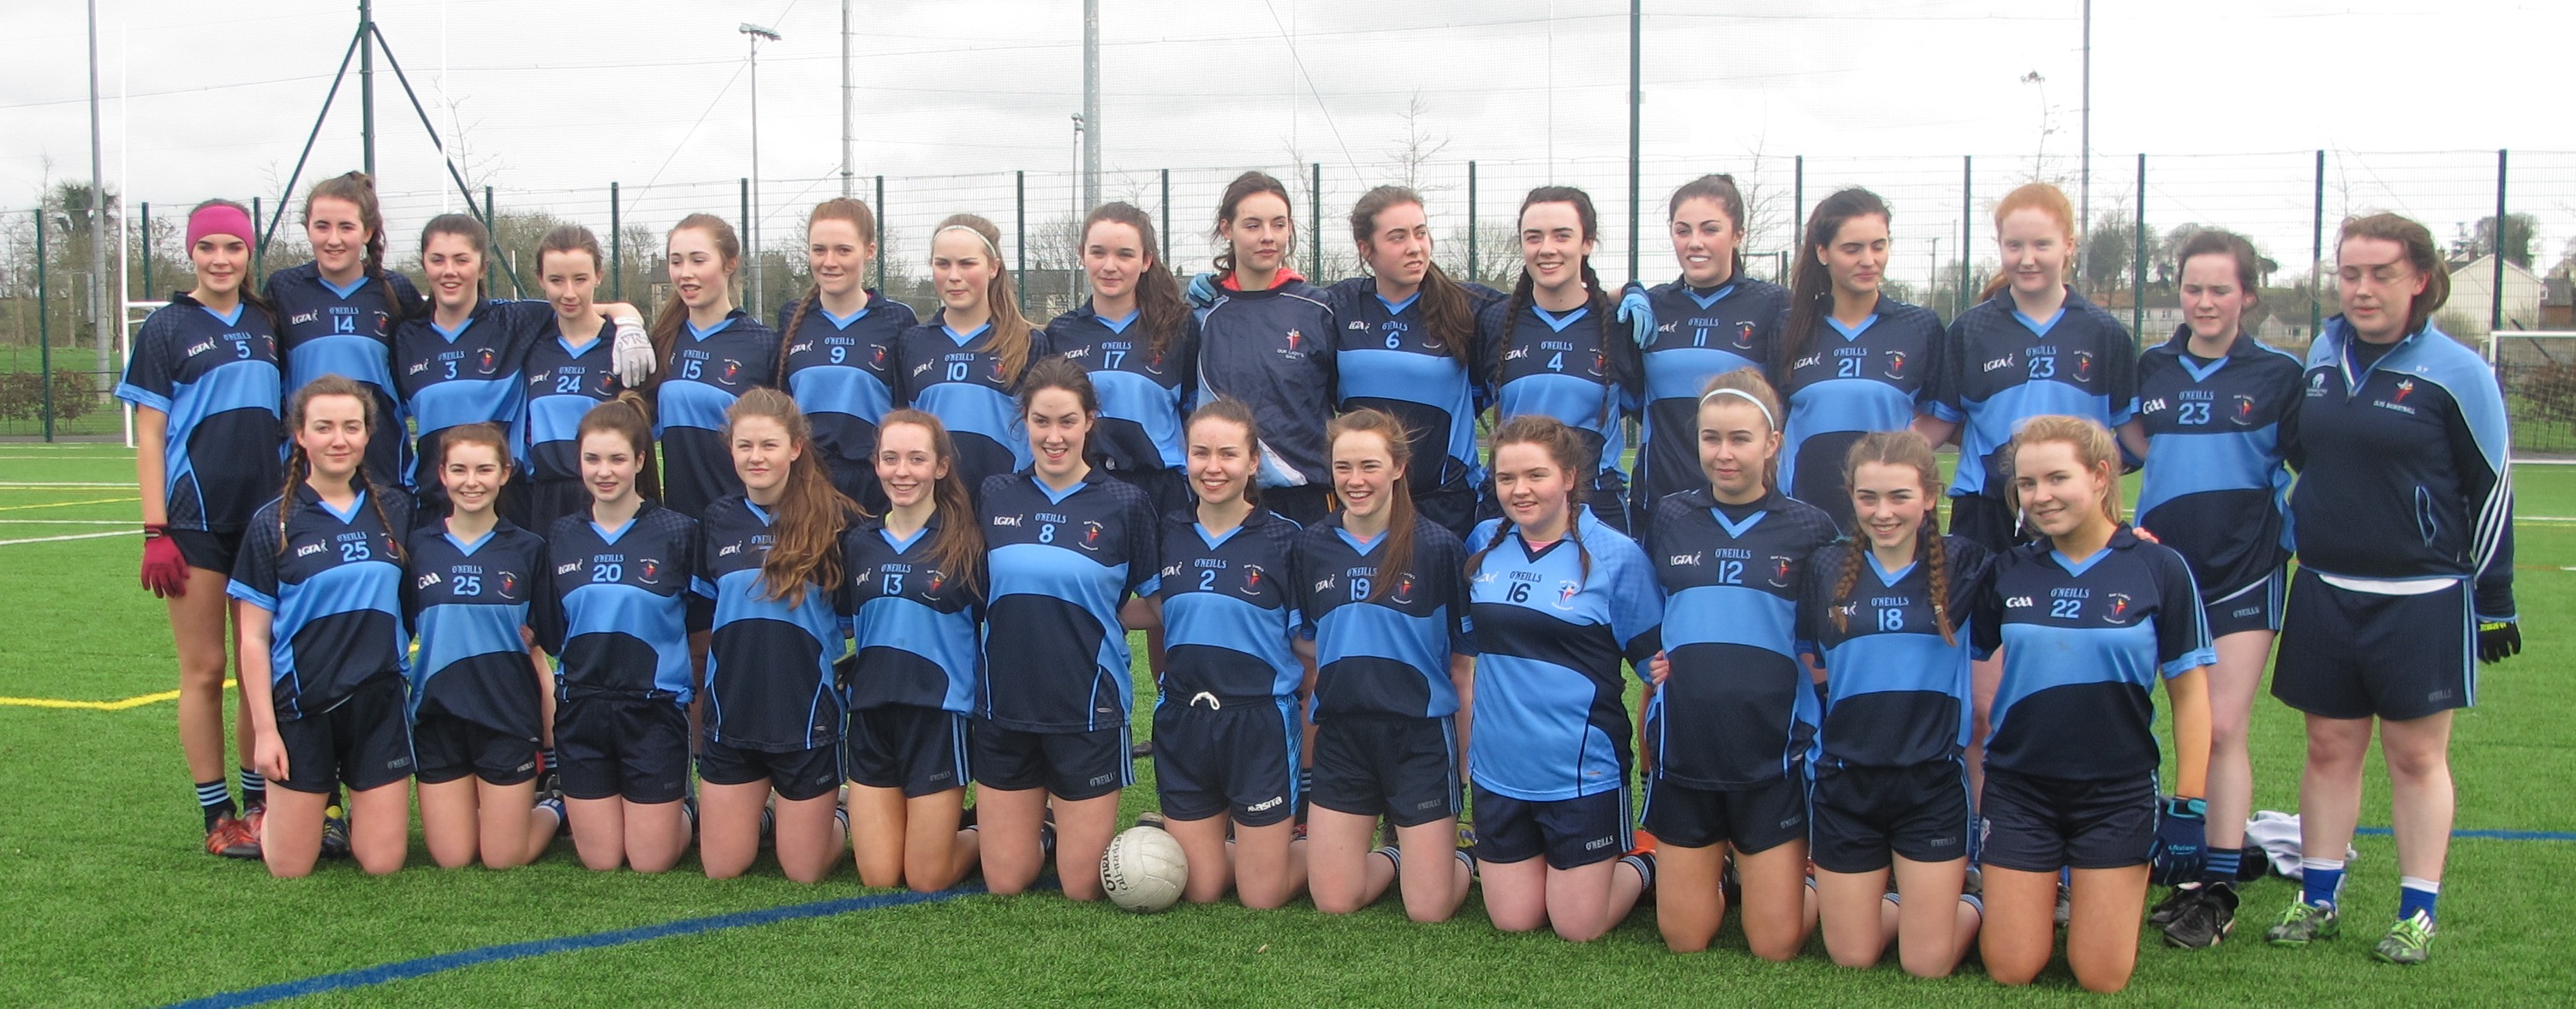 Our Ladys Secondary School Castleblayney qualify for Ulster A final